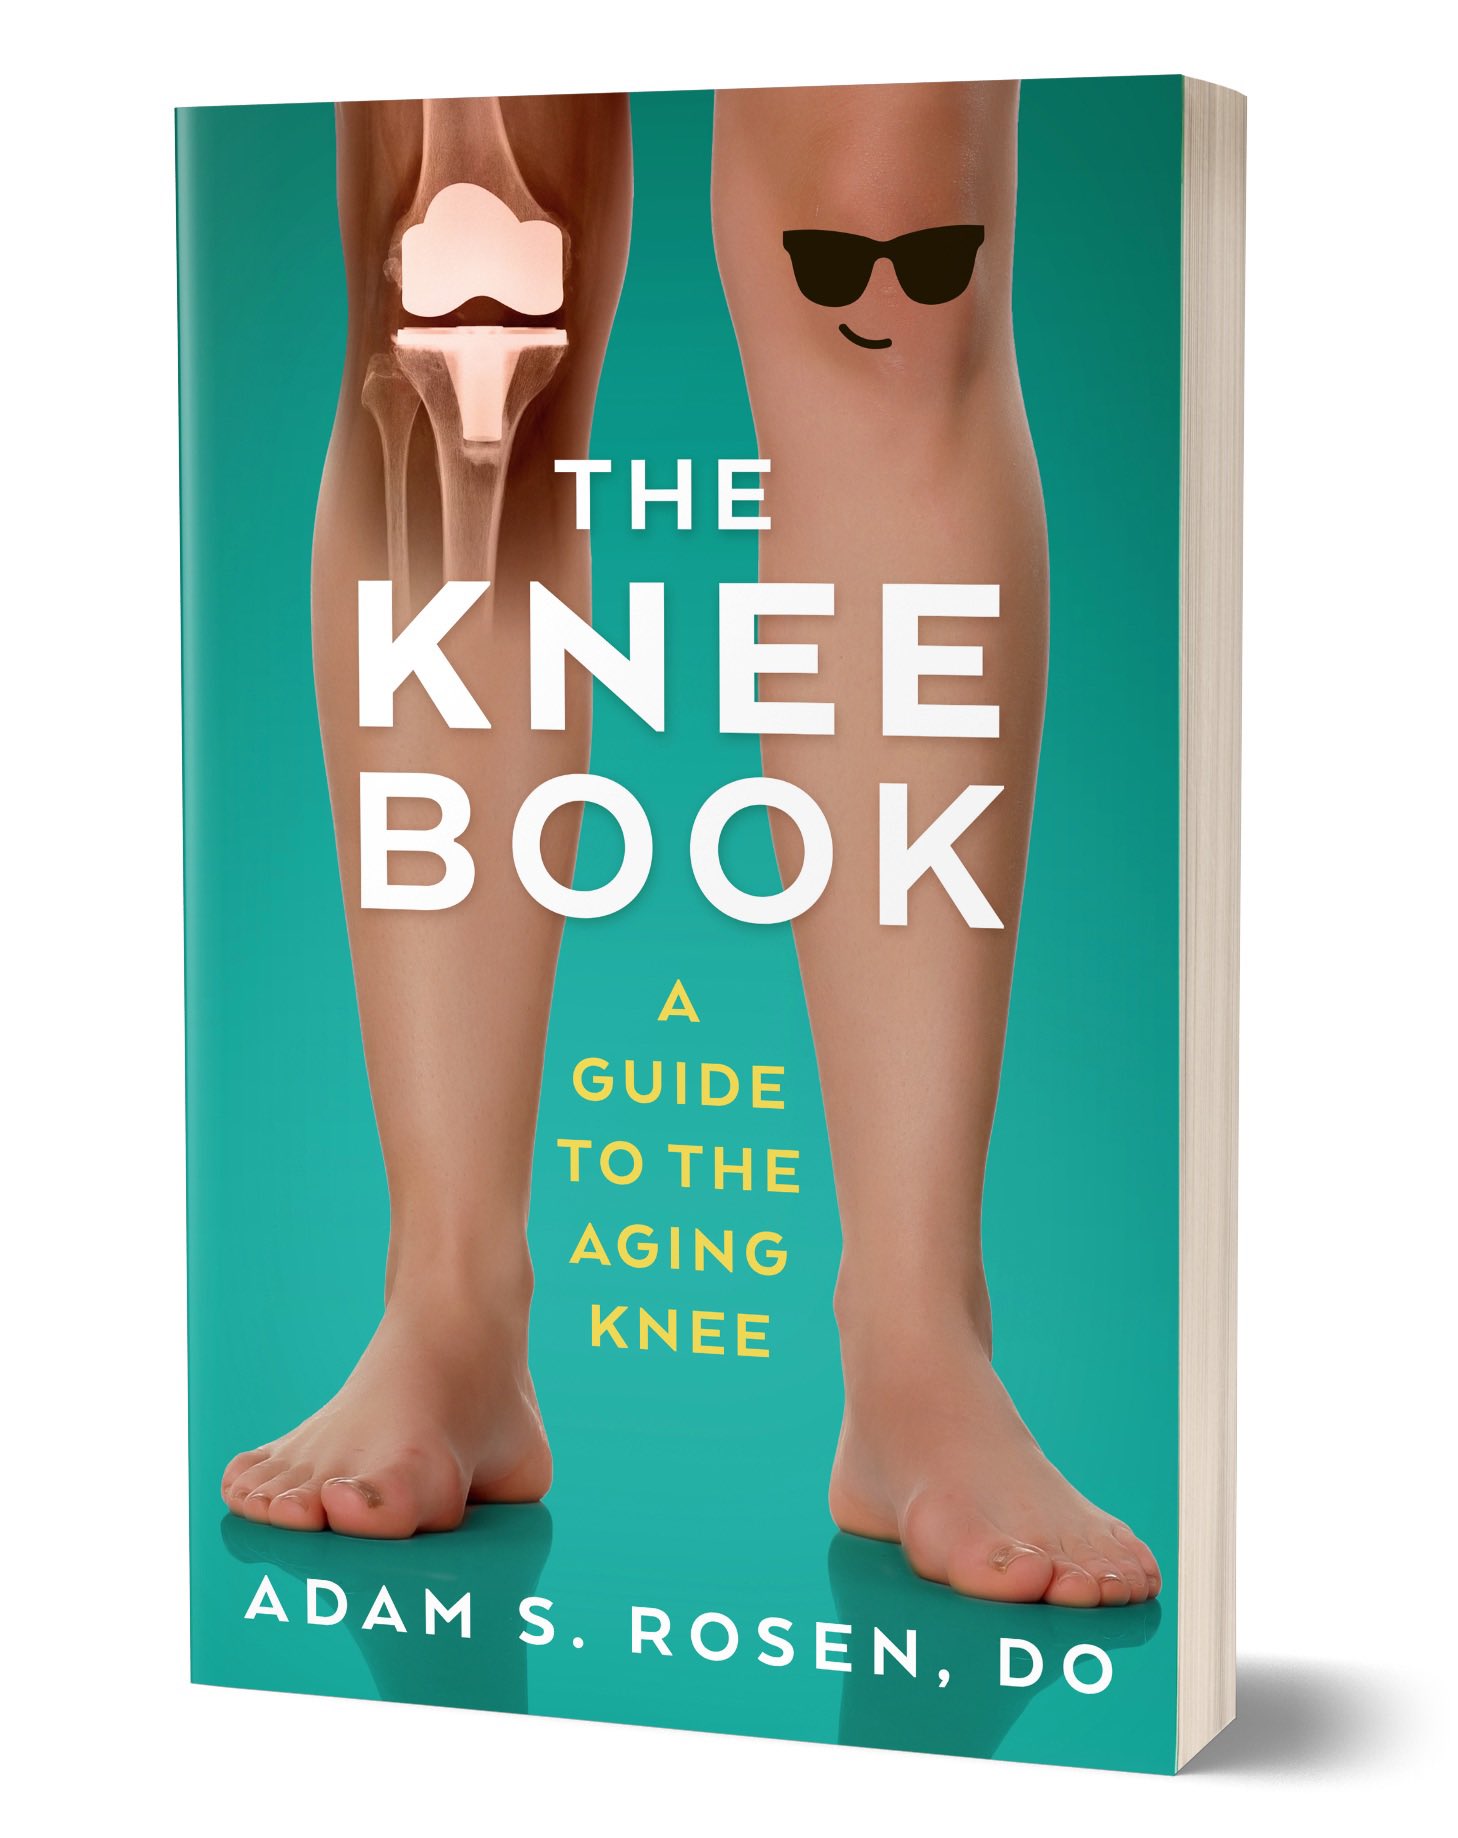 Tips From Author of The Knee Book: A Guide to the Aging Knee (Part 1/2)